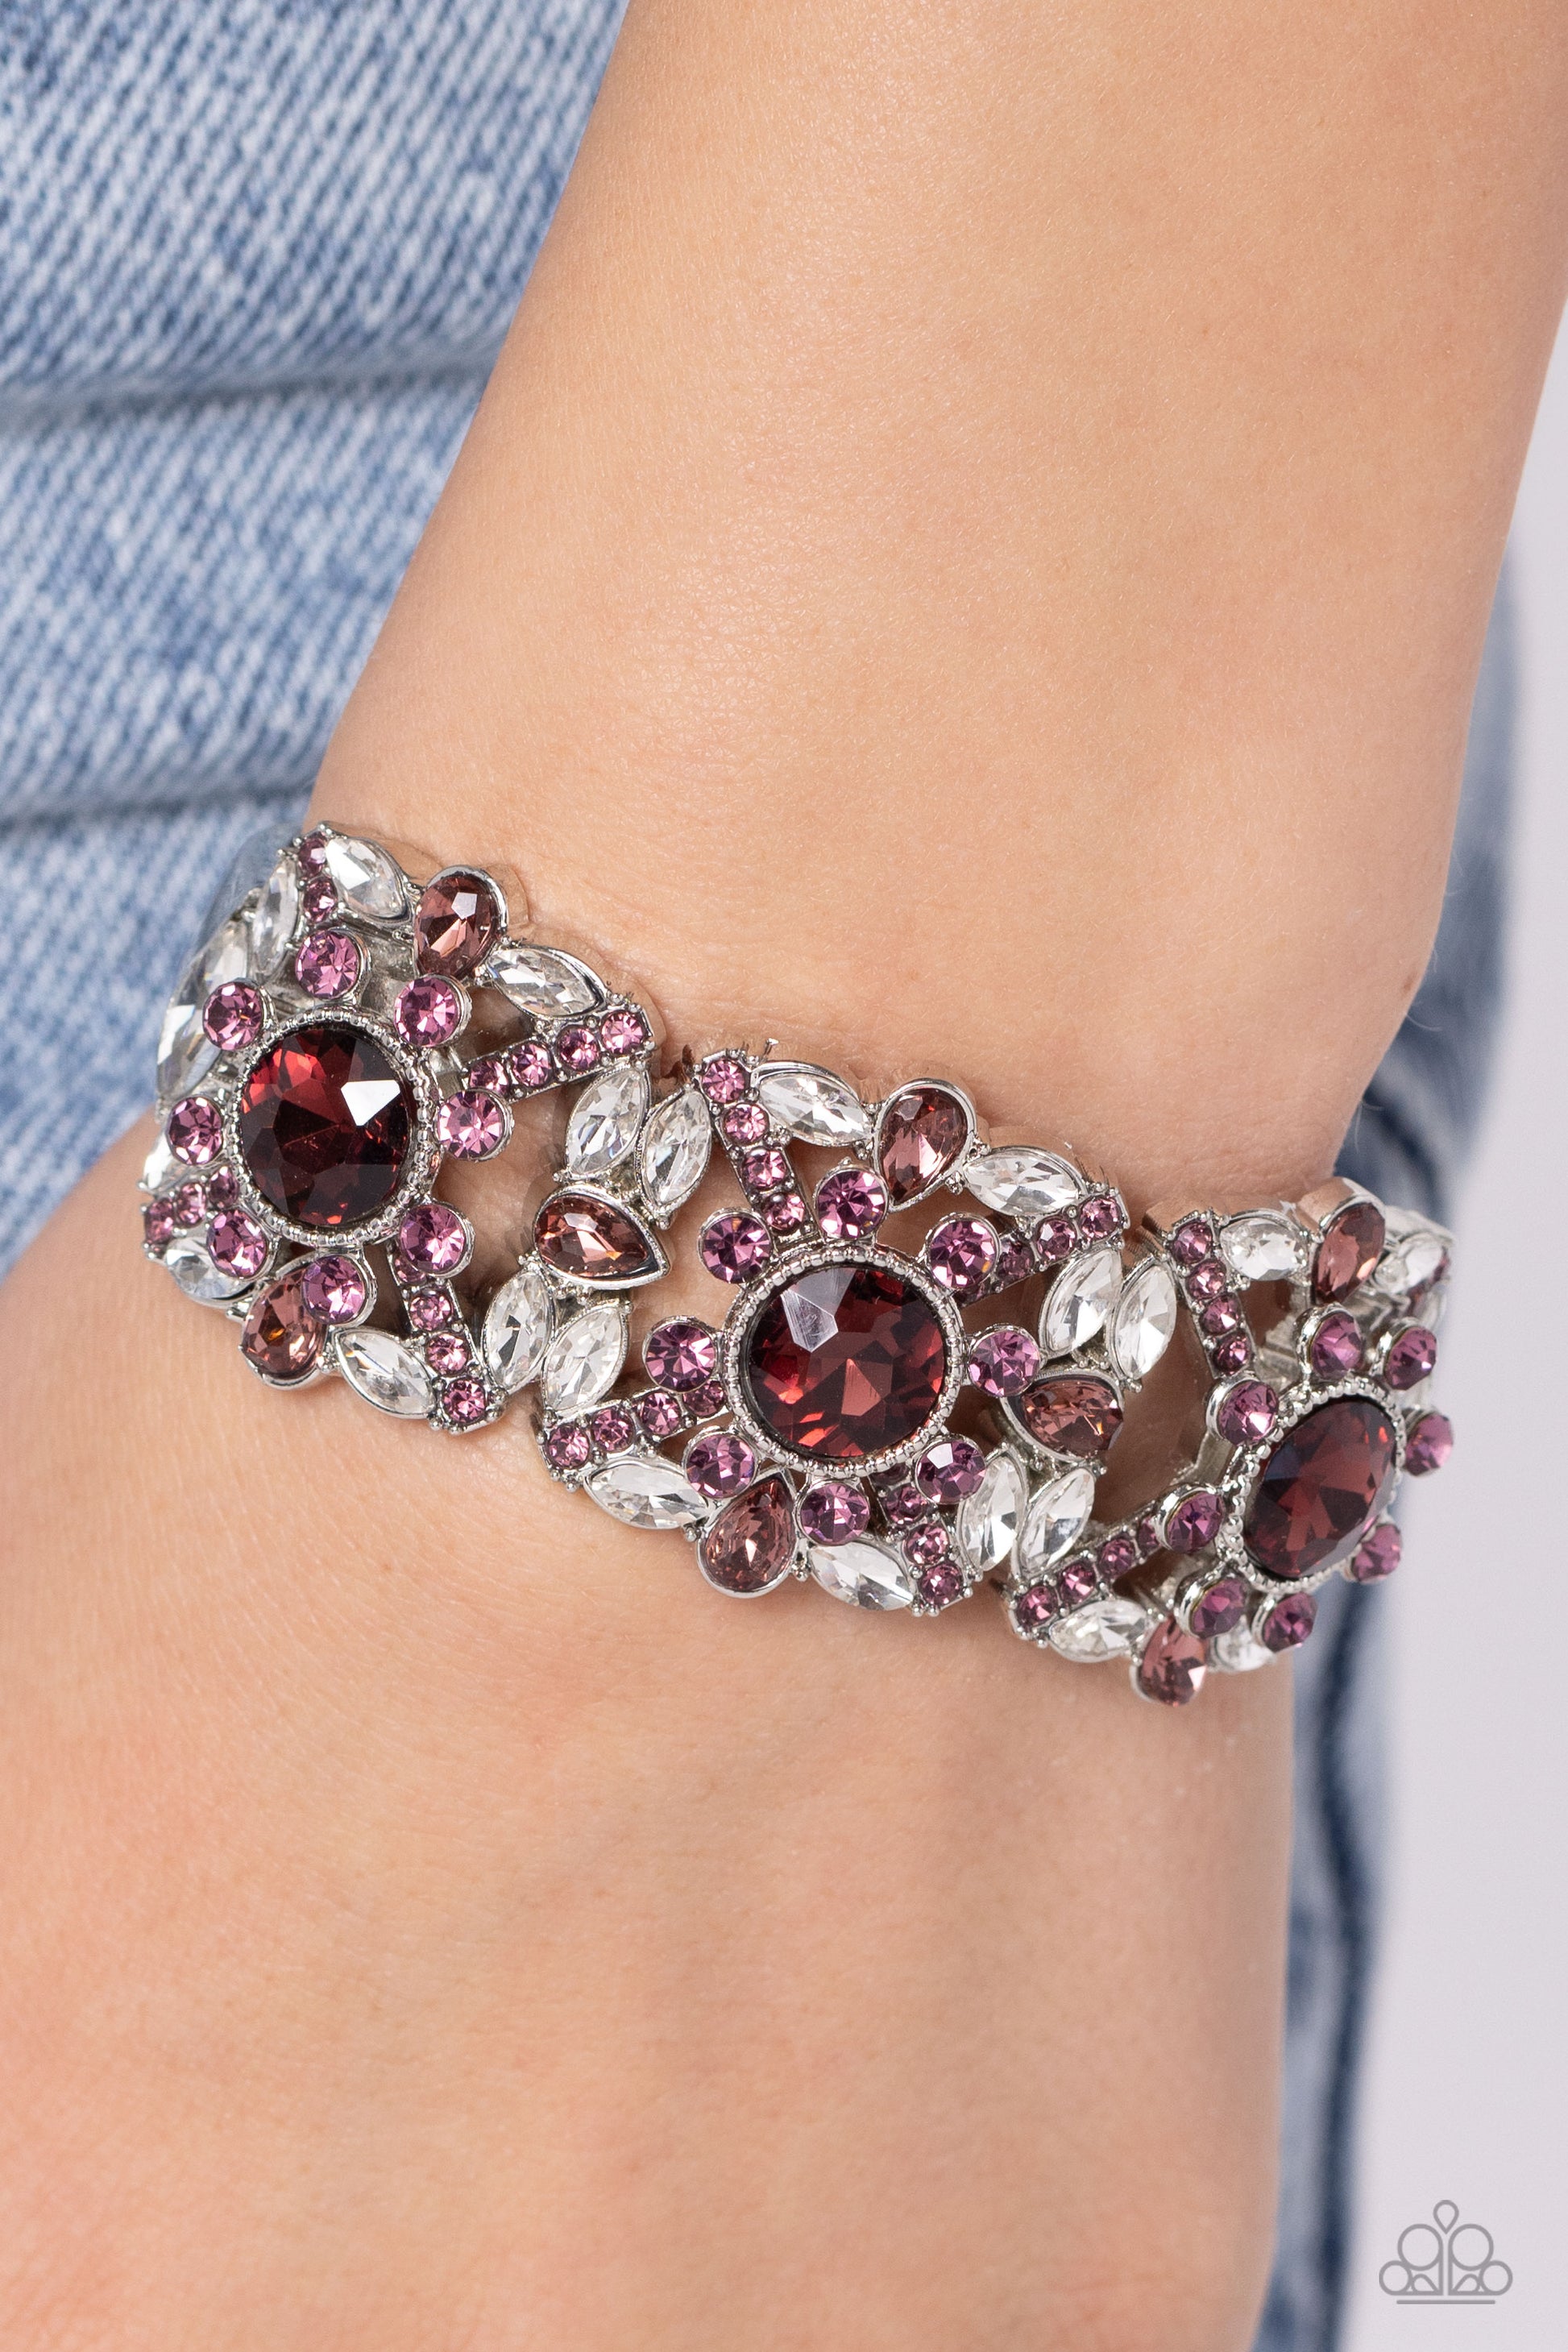 Shimmering Solo Purple Hinge Bracelet - Paparazzi Accessories  Various purple and white rhinestones in round, teardrop, and marquise cuts sparkle atop airy, silver frames, connected to a silver bangle-like bracelet around the wrist for a jaw-dropping dazzle. Features a hinged closure.  Sold as one individual bracelet.  SKU: P9RE-PRXX-176XX